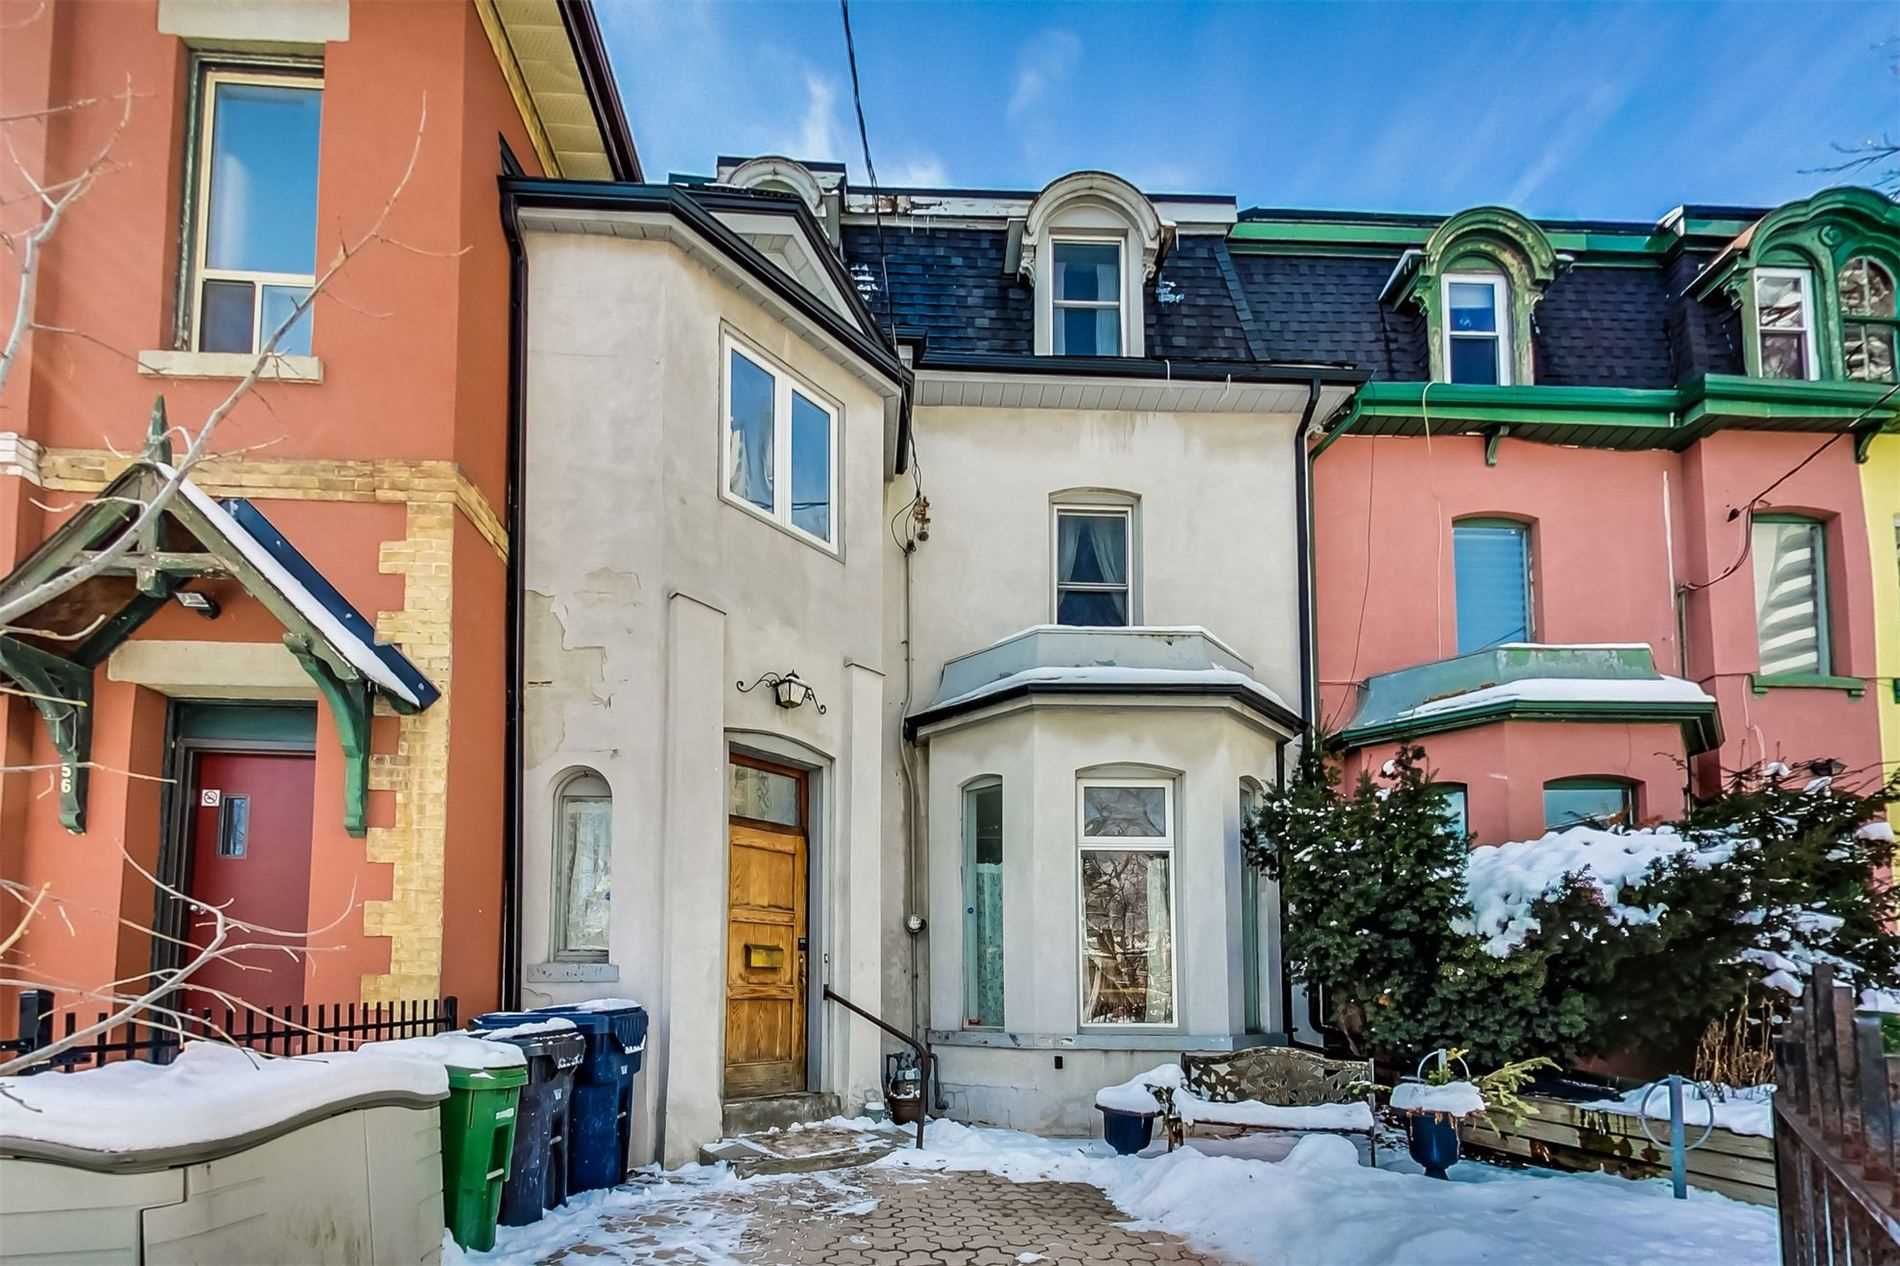 New property listed in Cabbagetown-South St. James Town, Toronto C08